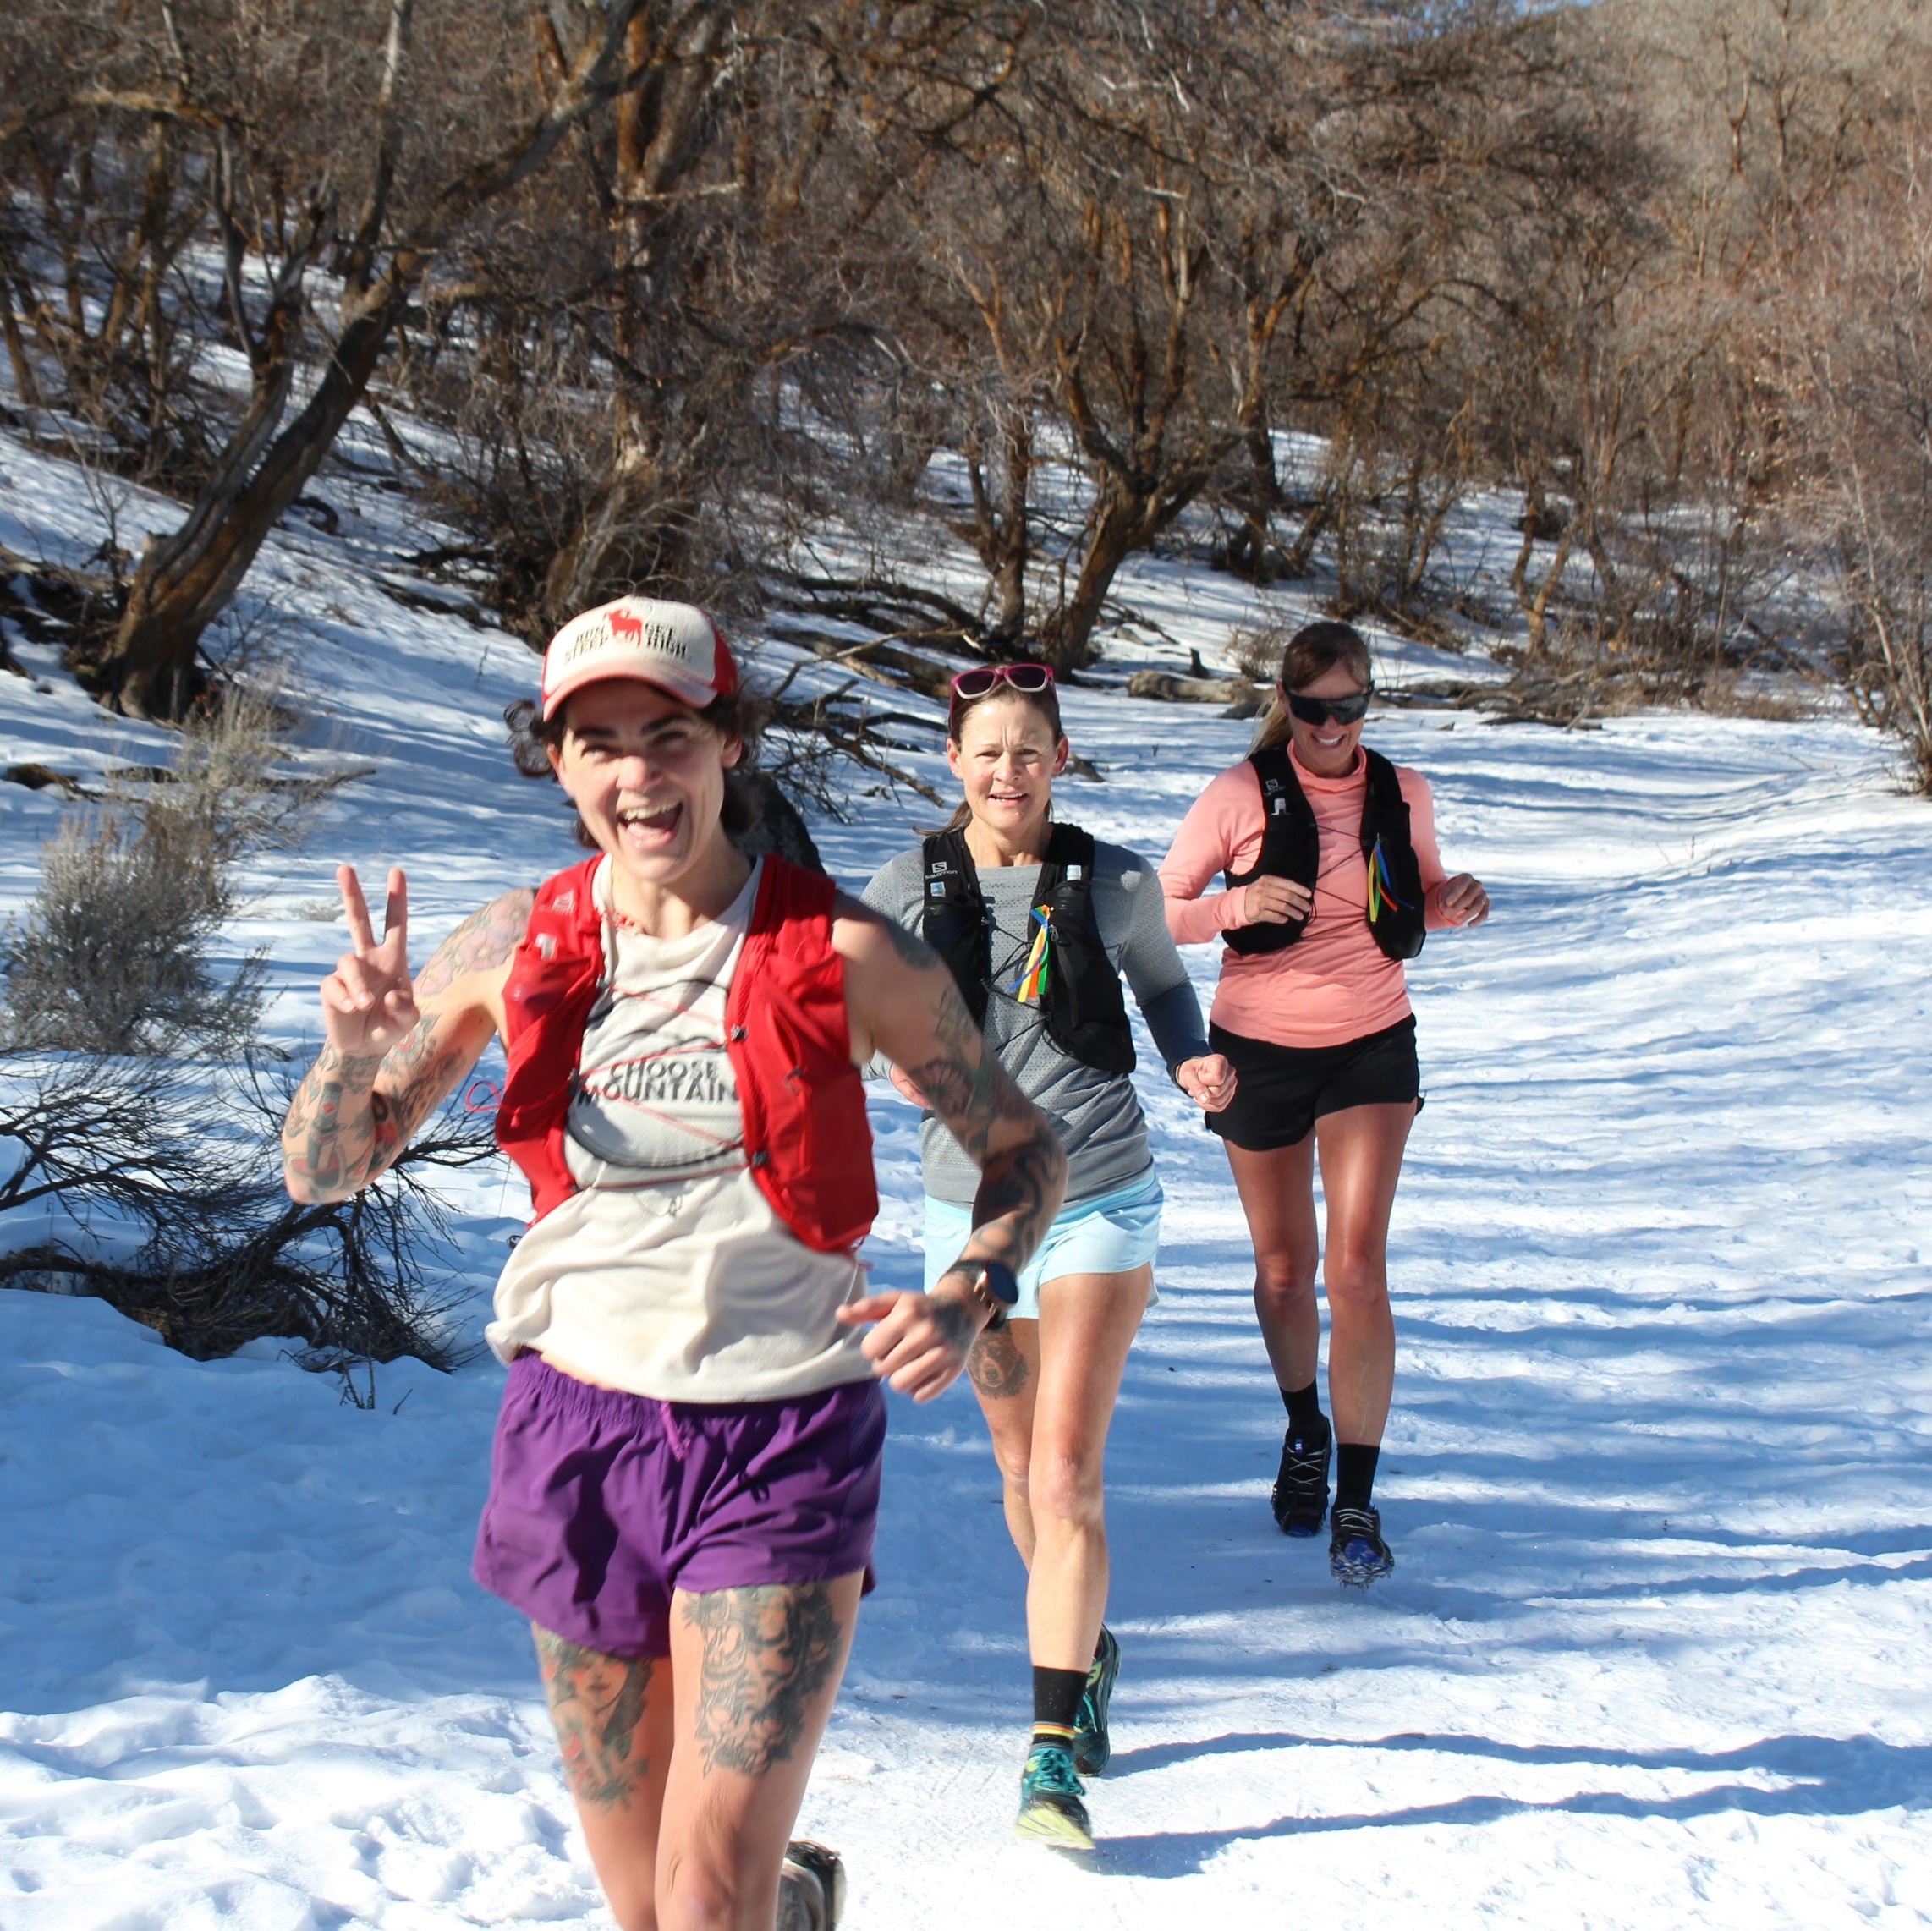 Three trail runners heading up a snowy trail in the mountains.